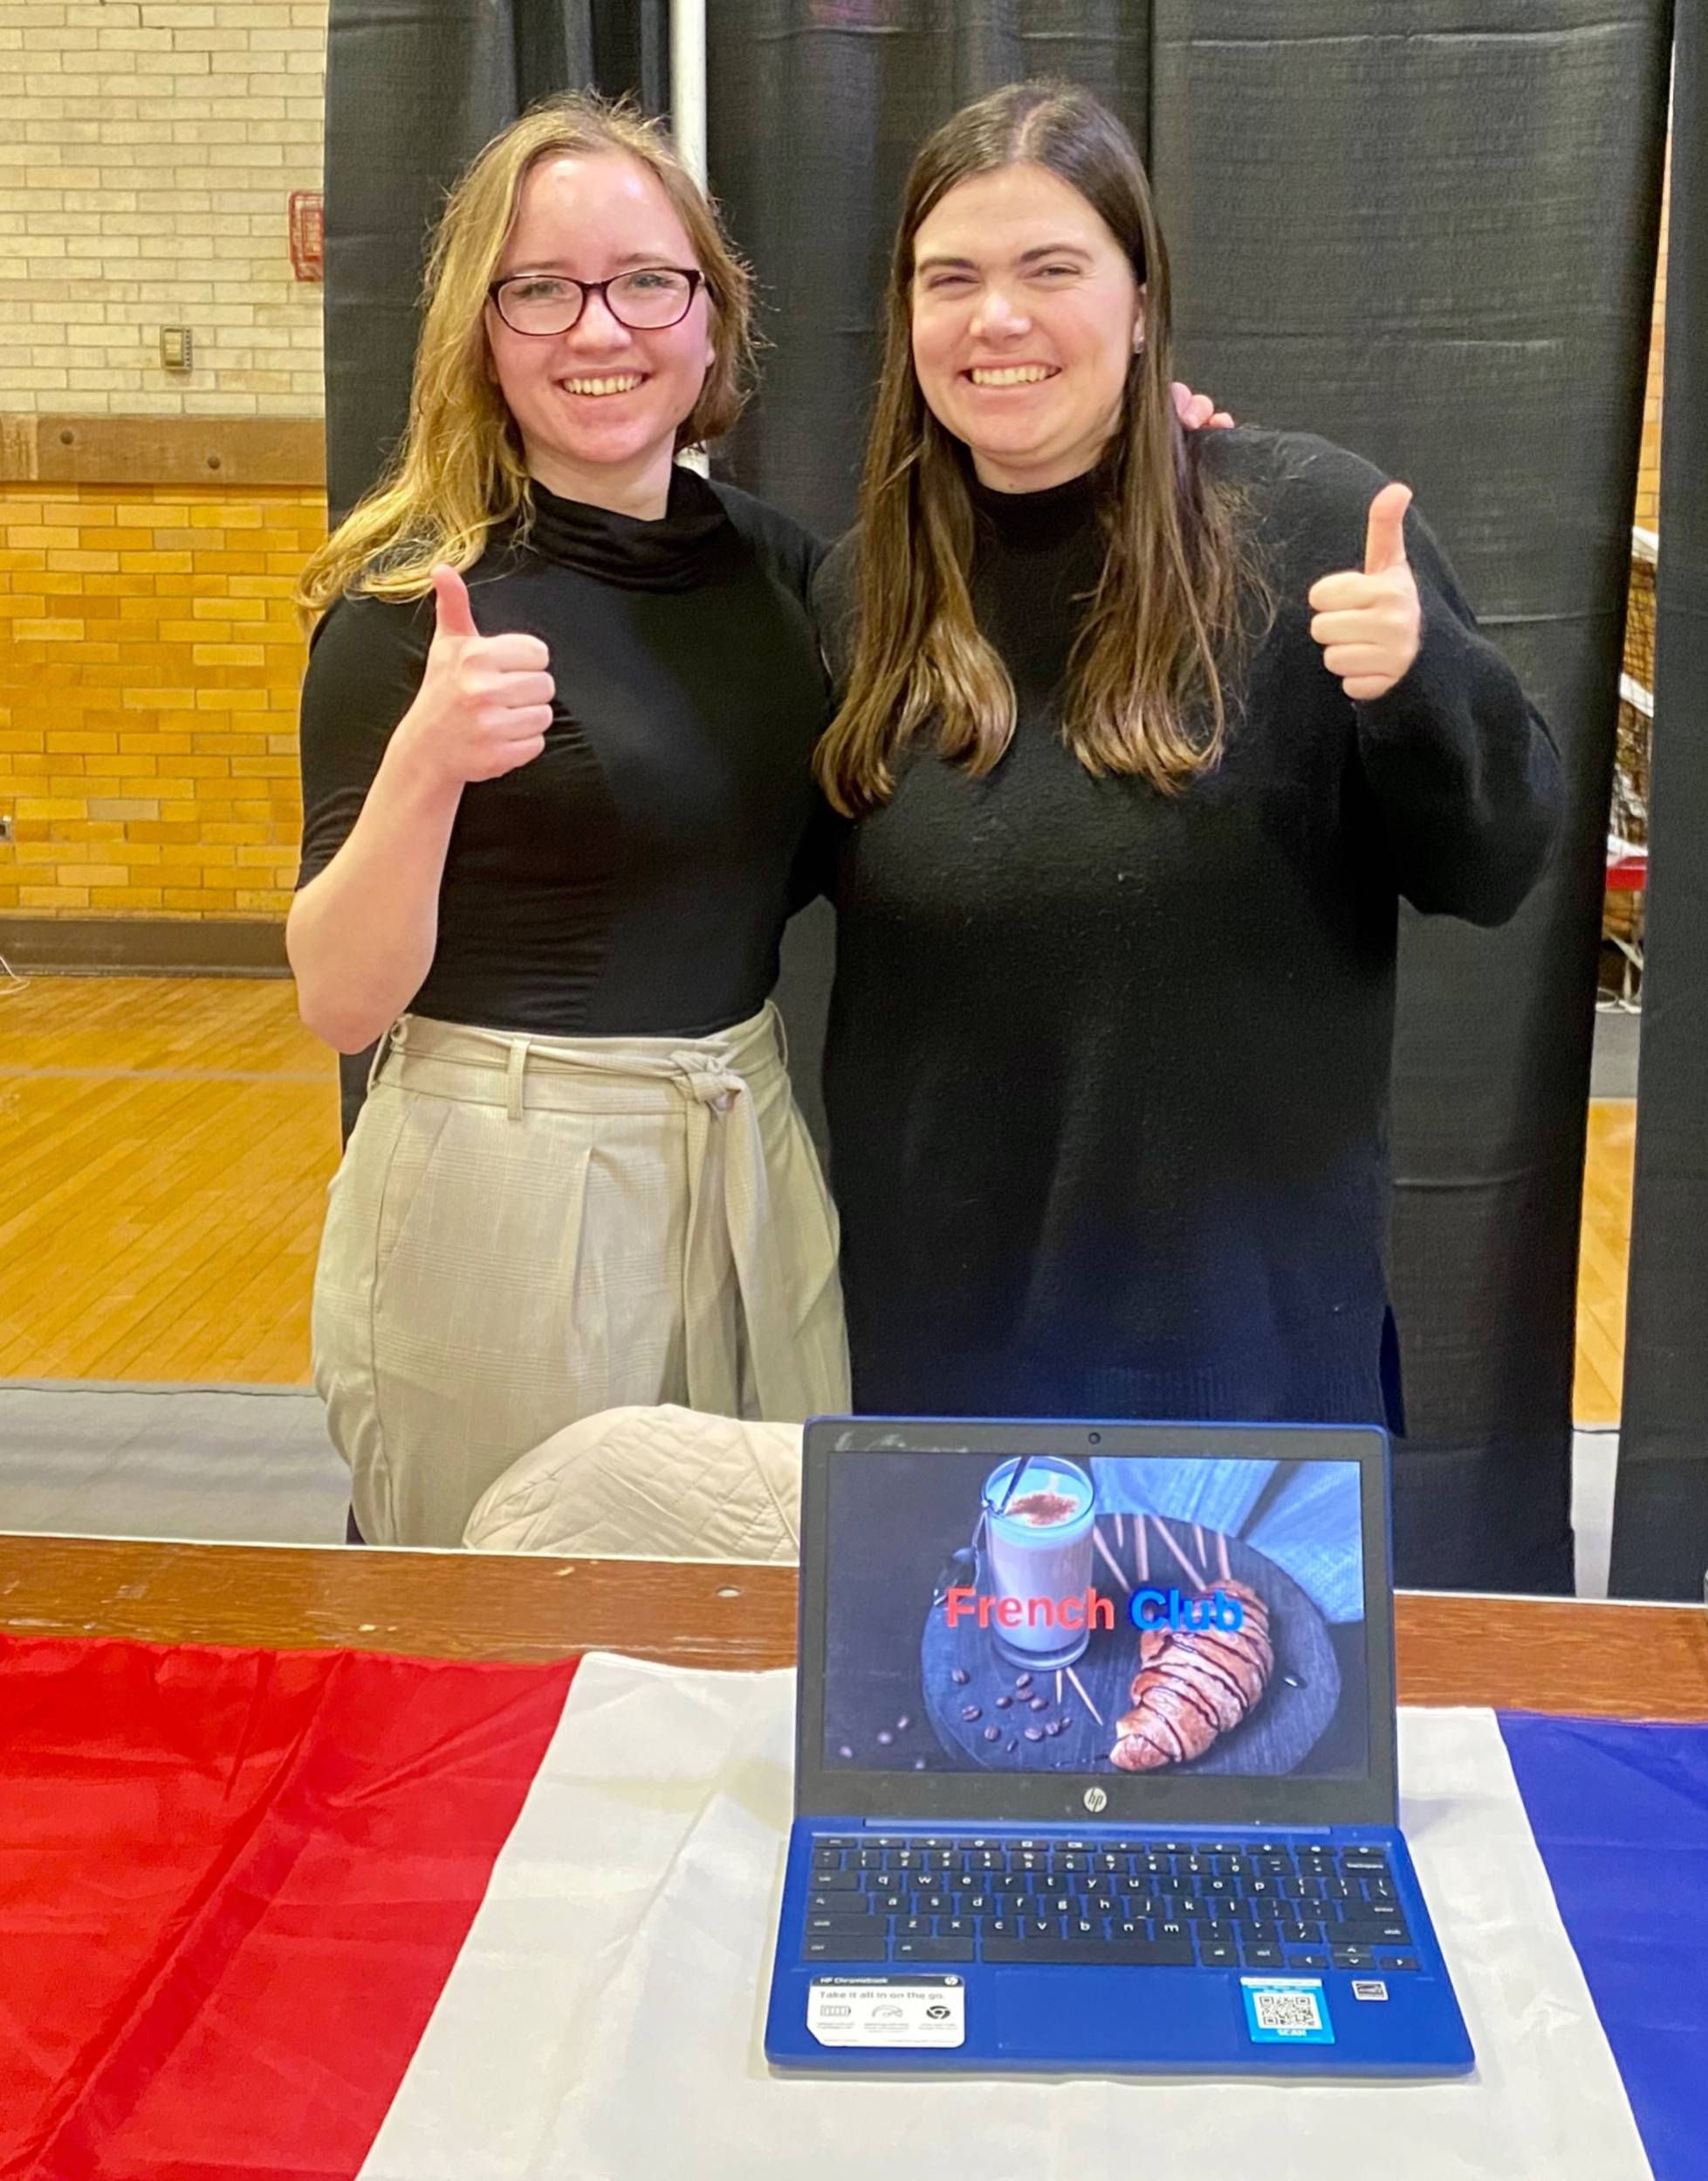 Two Colgate students pose with thumbs up signs in front of a laptop, sitting on table decorated with the colors of France's flag.